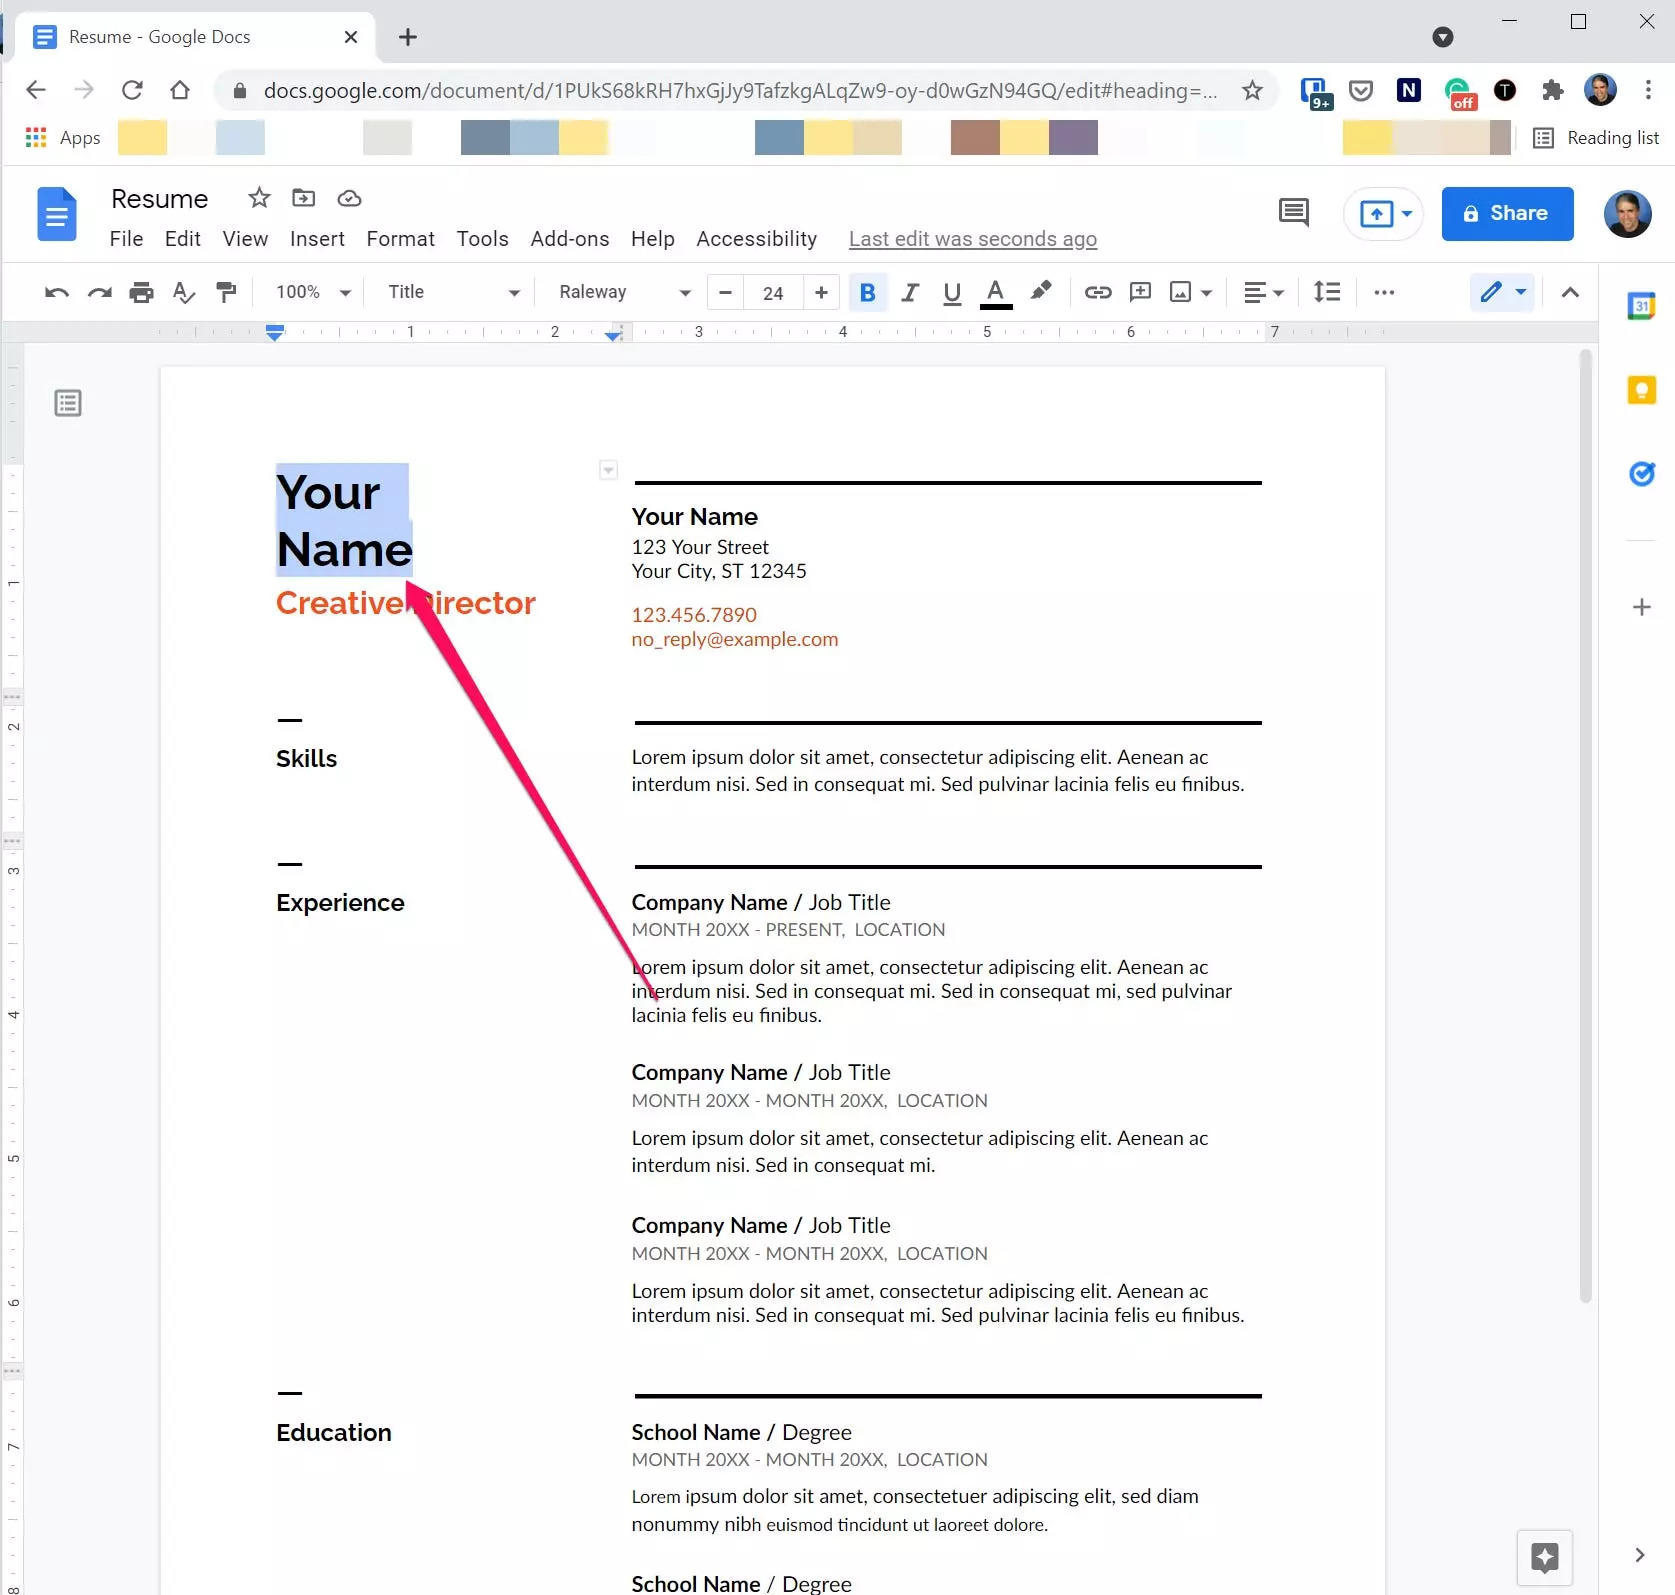 How to use the Google Docs résumé template to create and edit a professional document for job applications